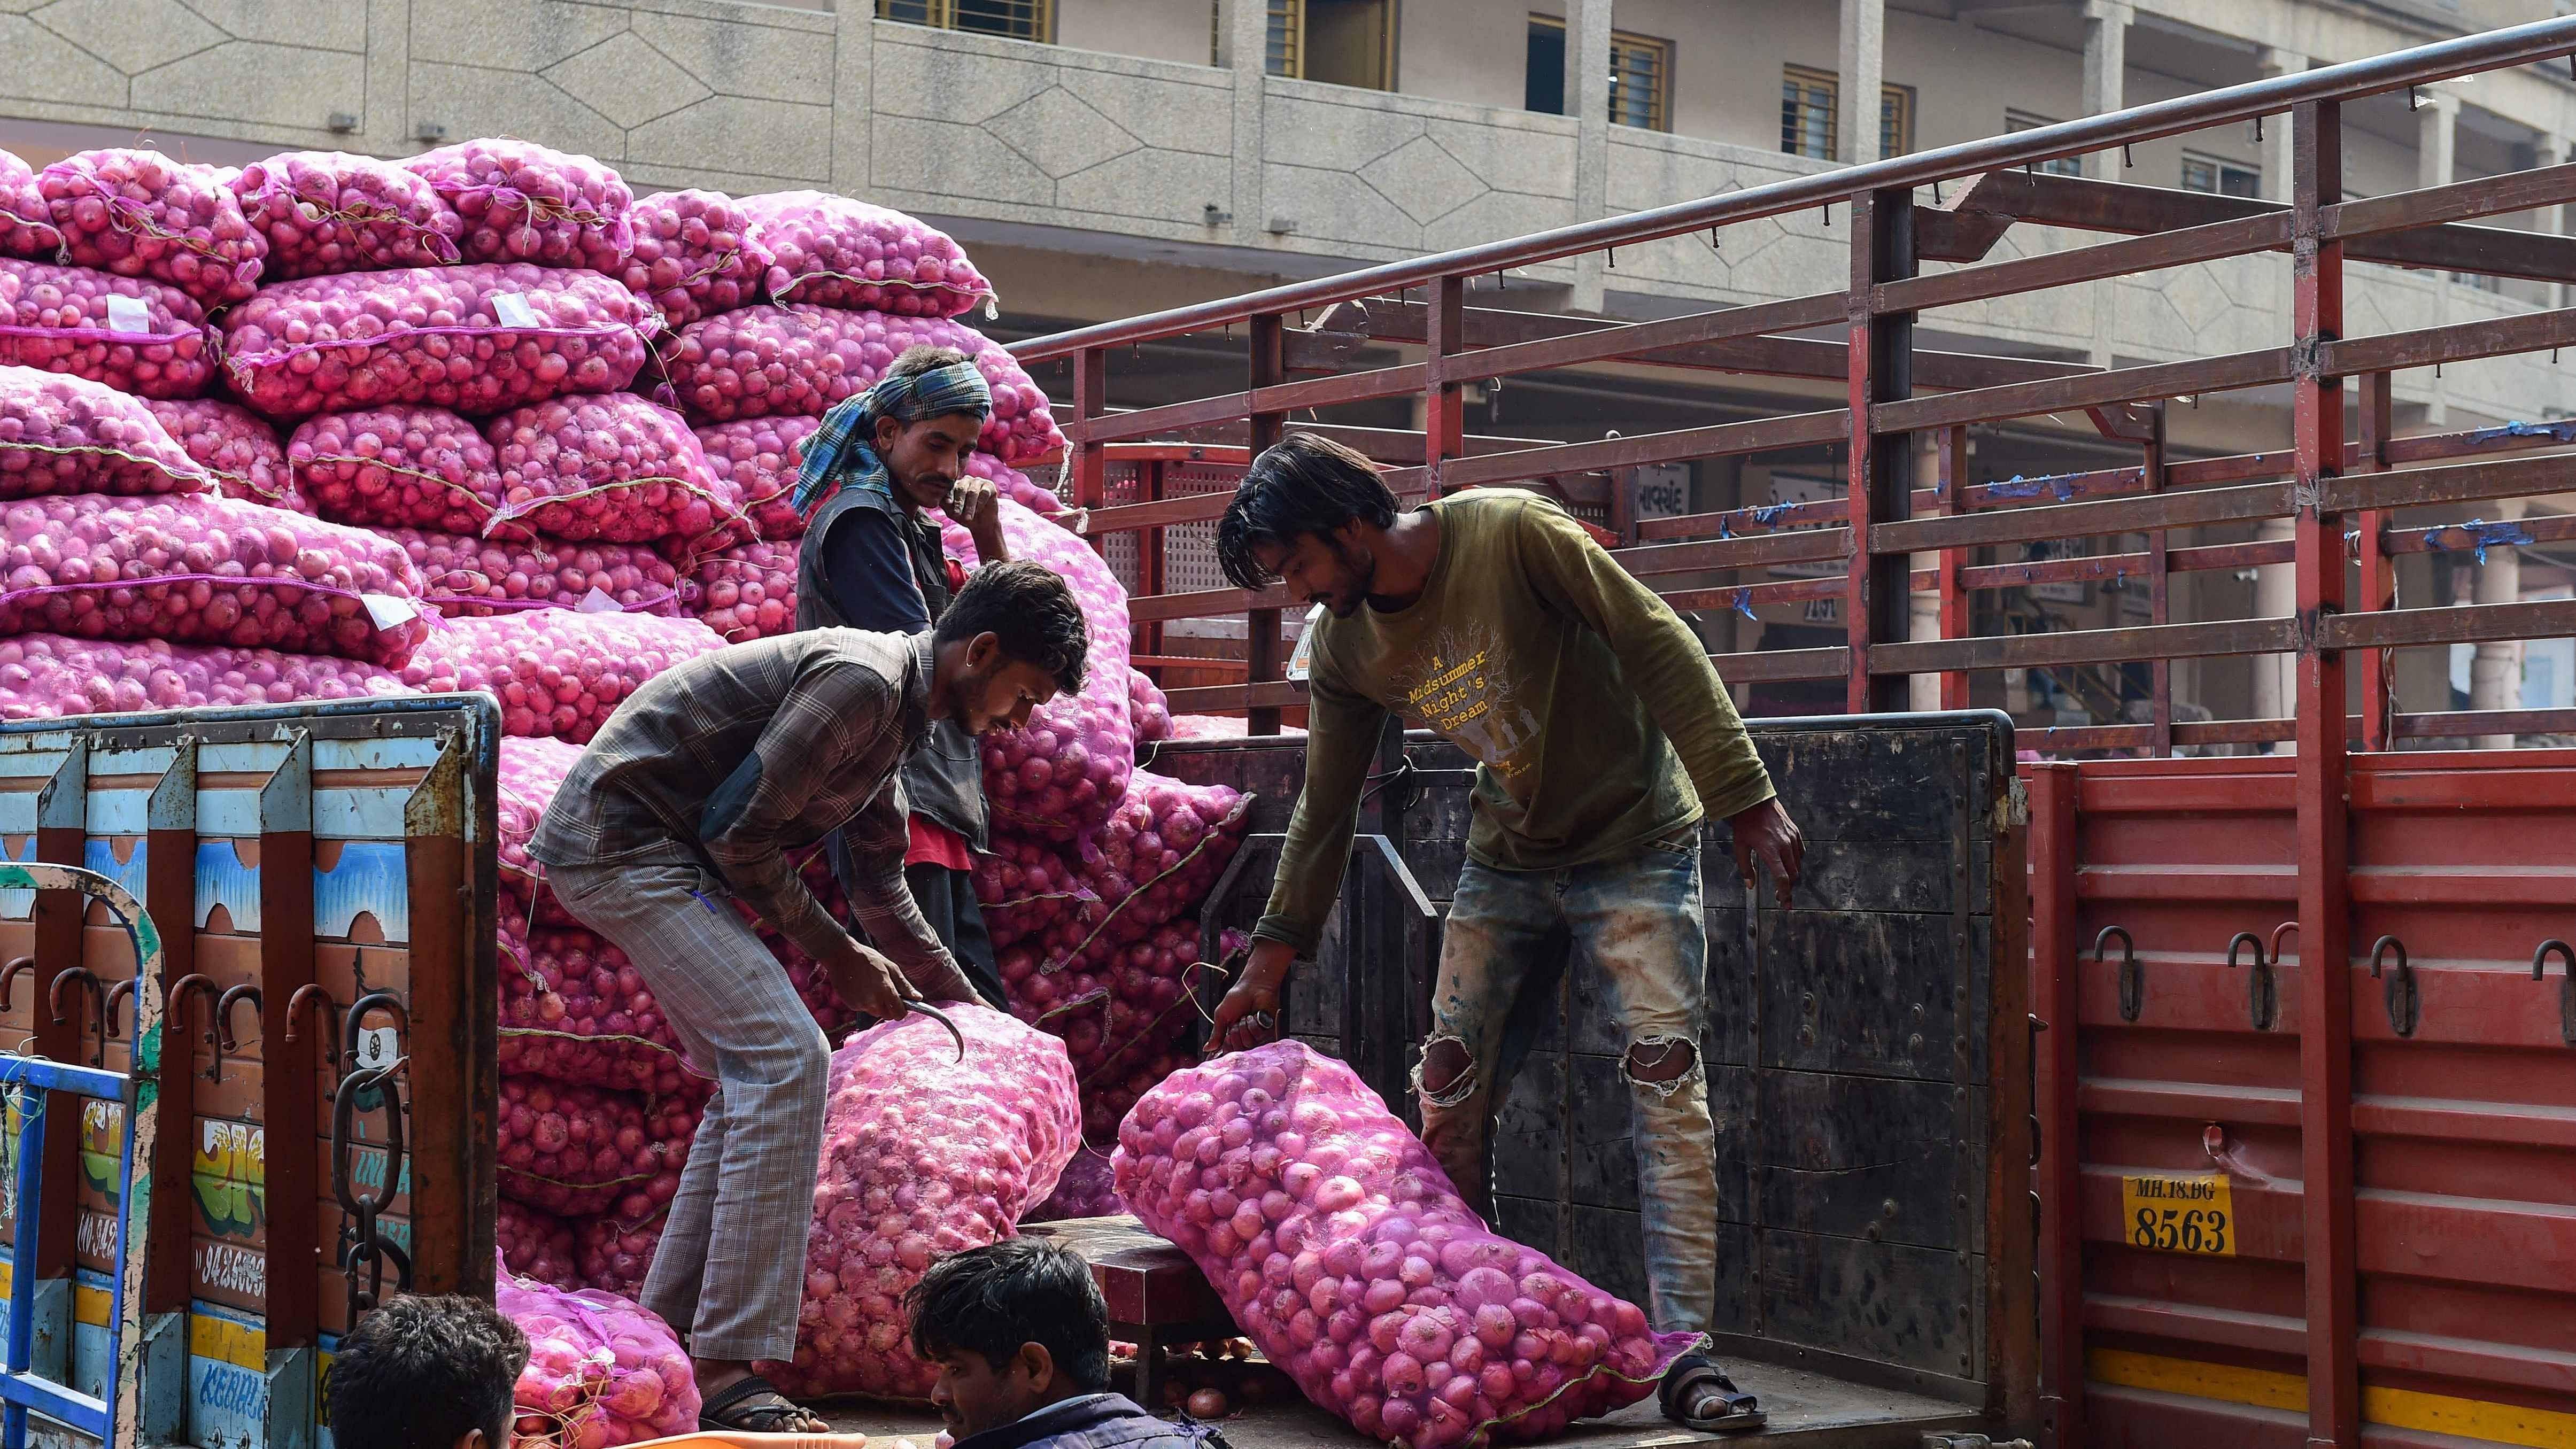 The Maharashtra government on Monday announced an ex-gratia relief of Rs 300 per quintal to onion farmers in the state. Credit: AFP Photo